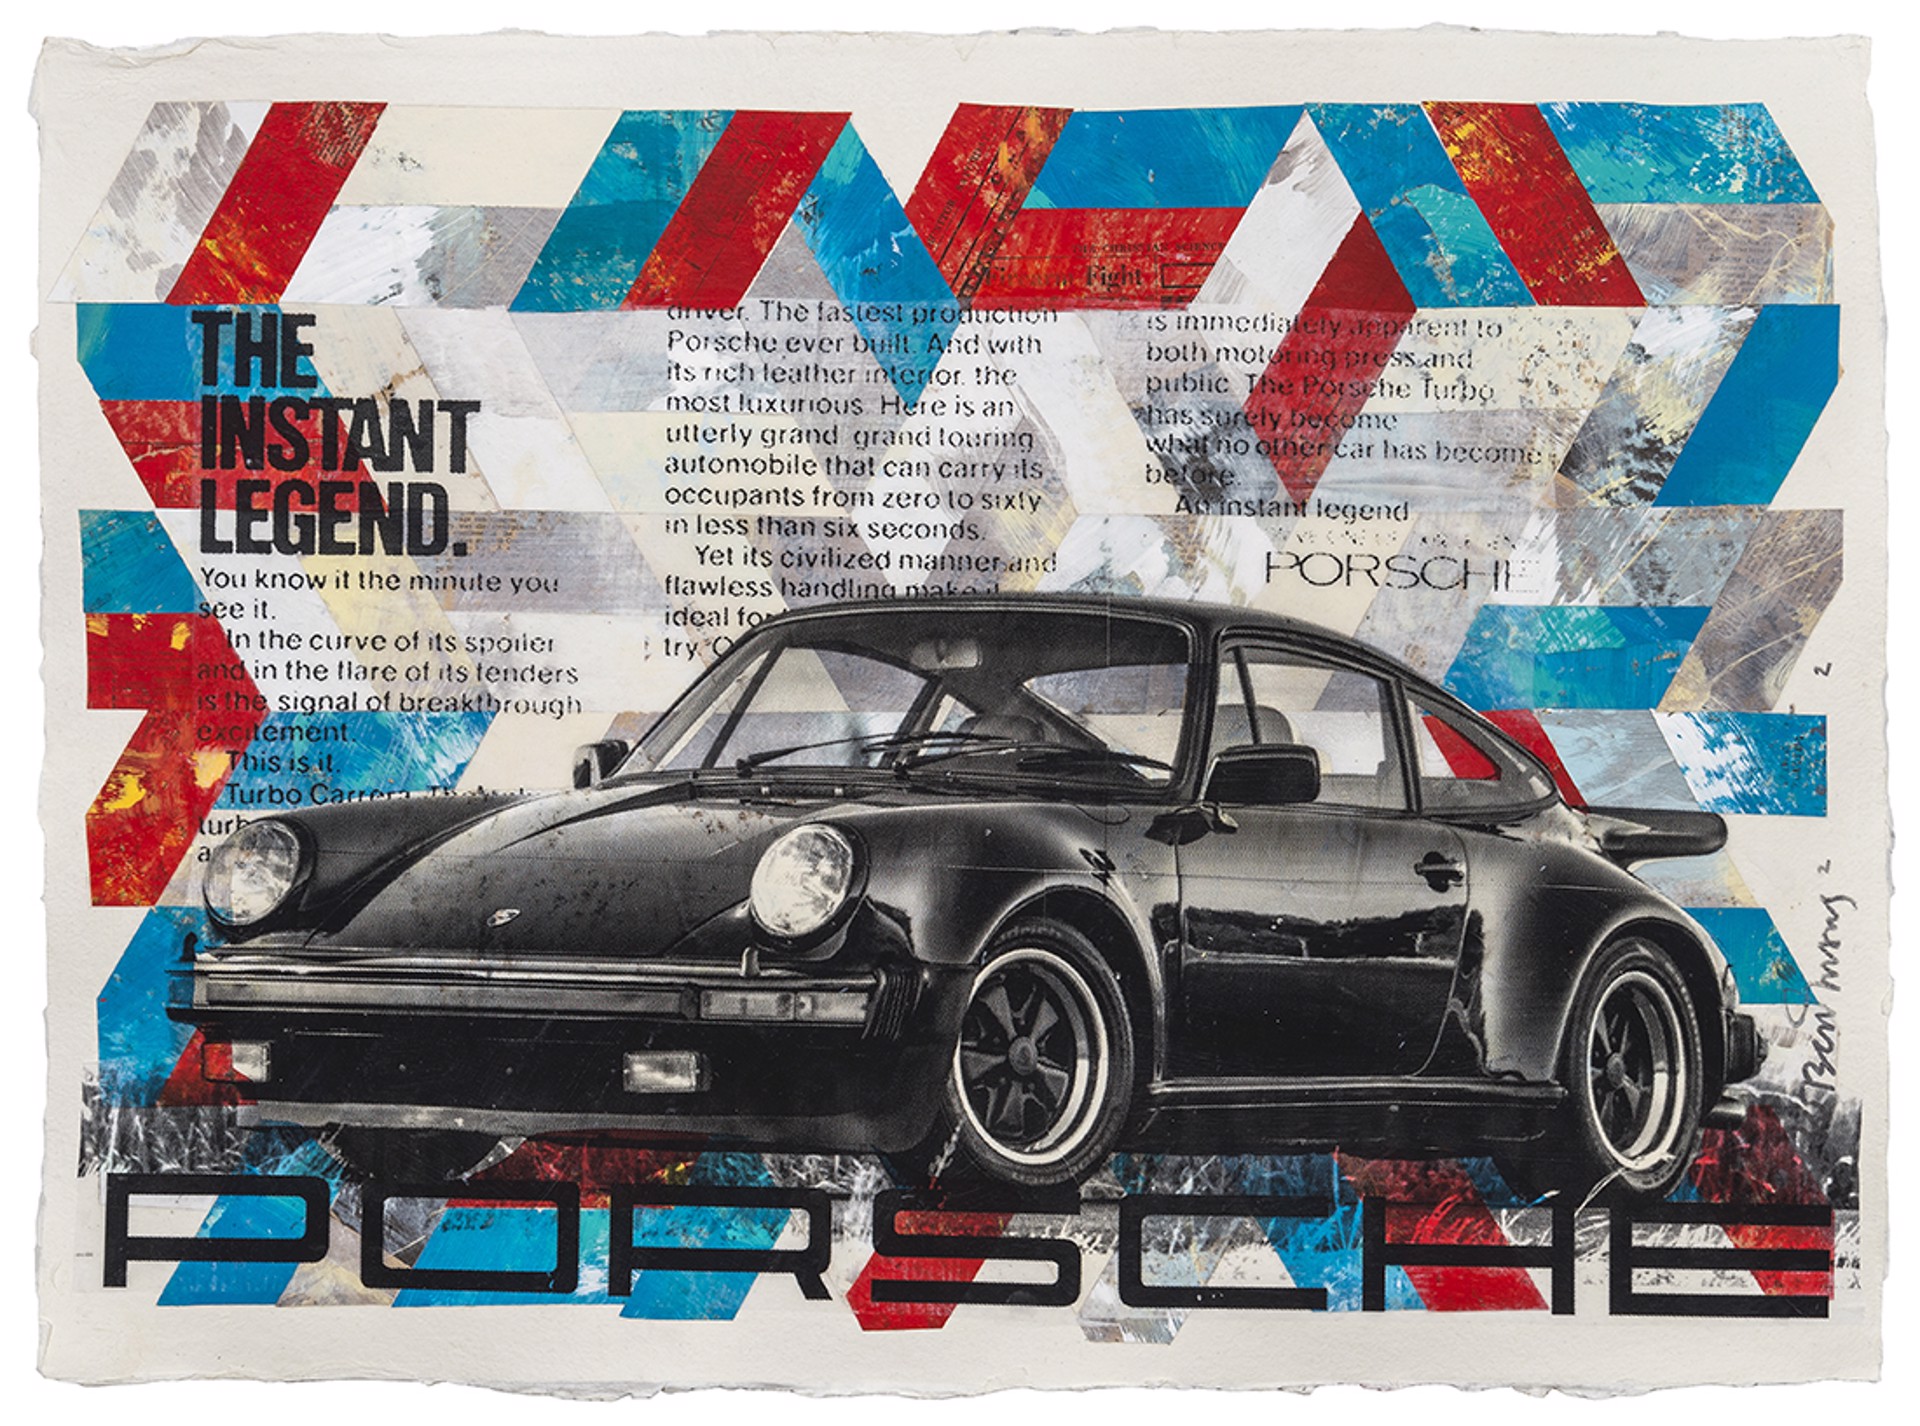 The Instant Legend 930 Turbo by Robert Mars